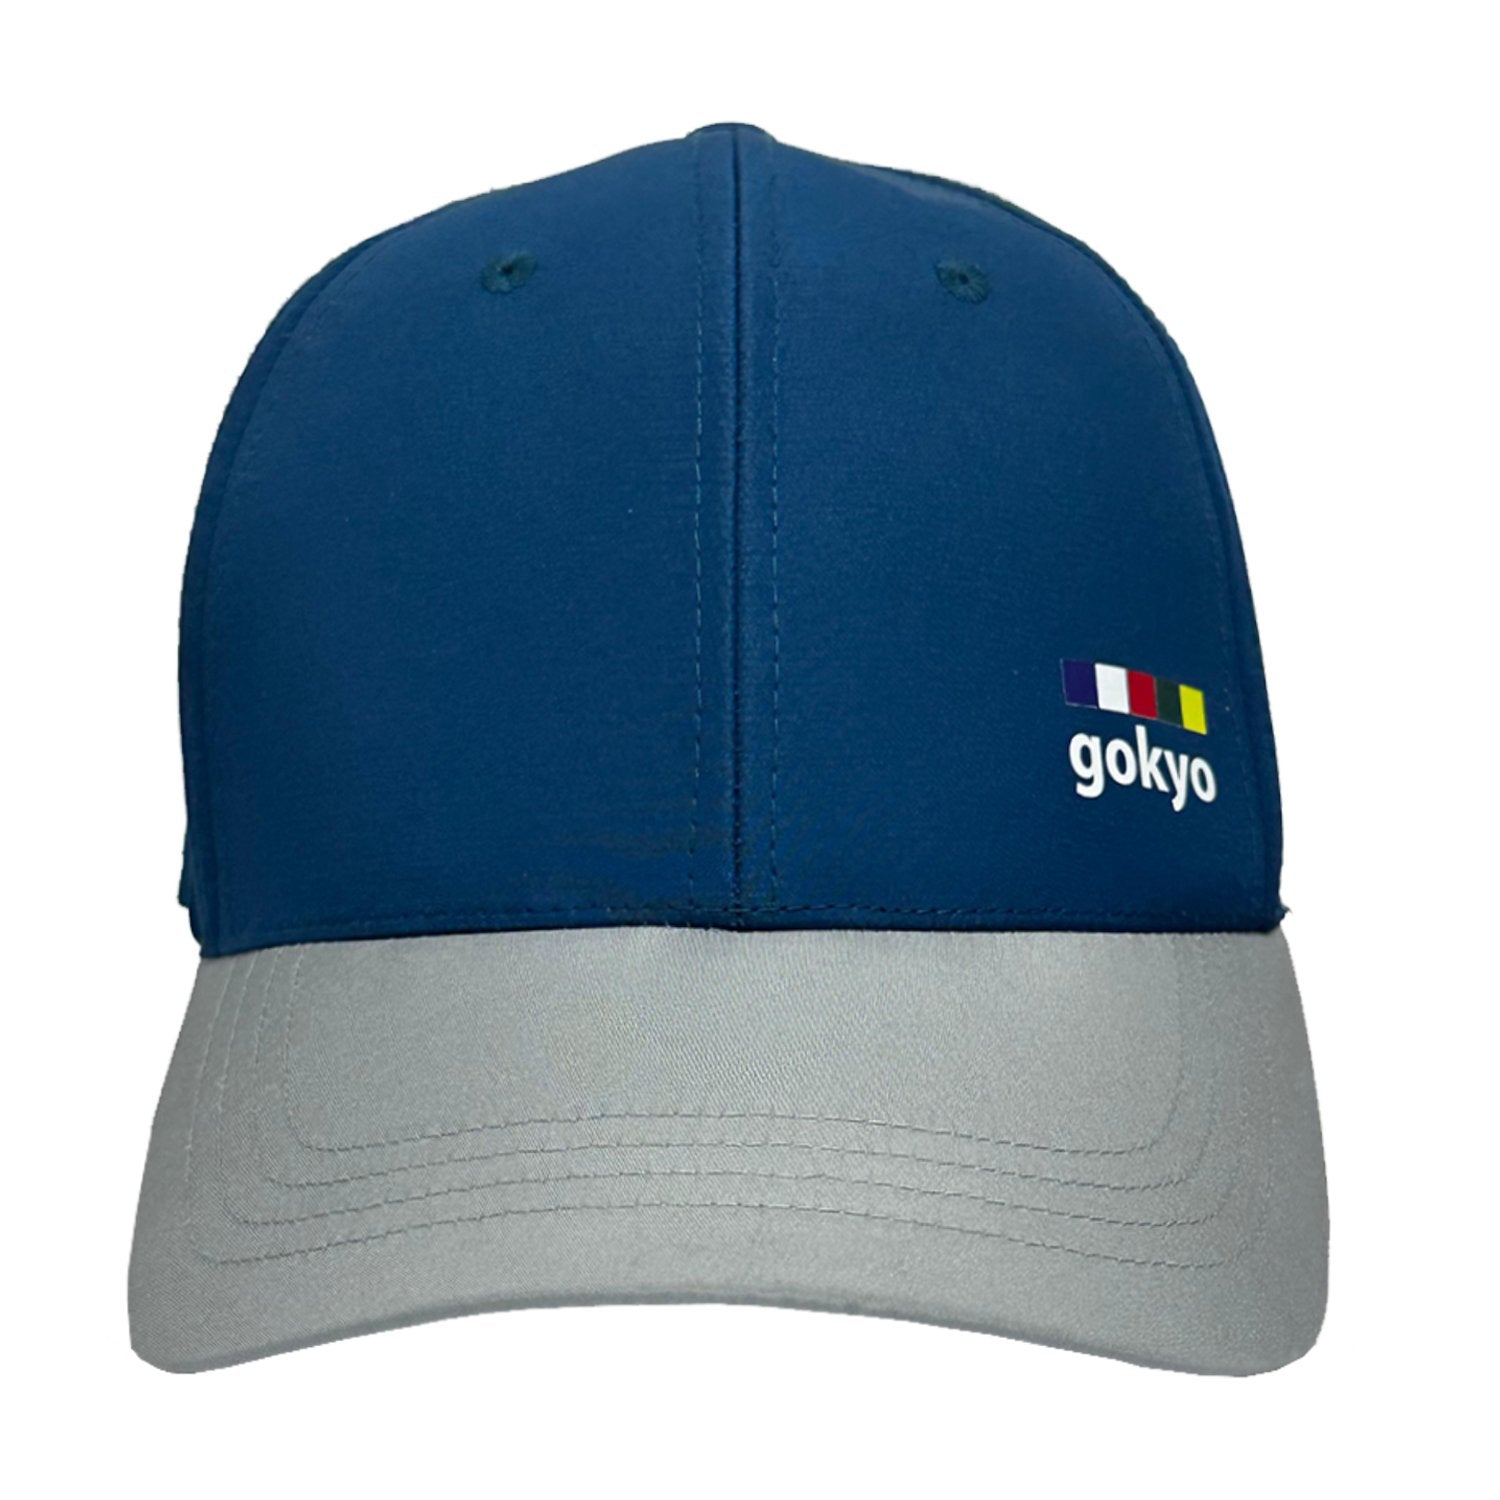 Buy Gokyo Kalimpong Dry Fit Cap Blue Free Size | Caps at Gokyo Outdoor Clothing & Gear